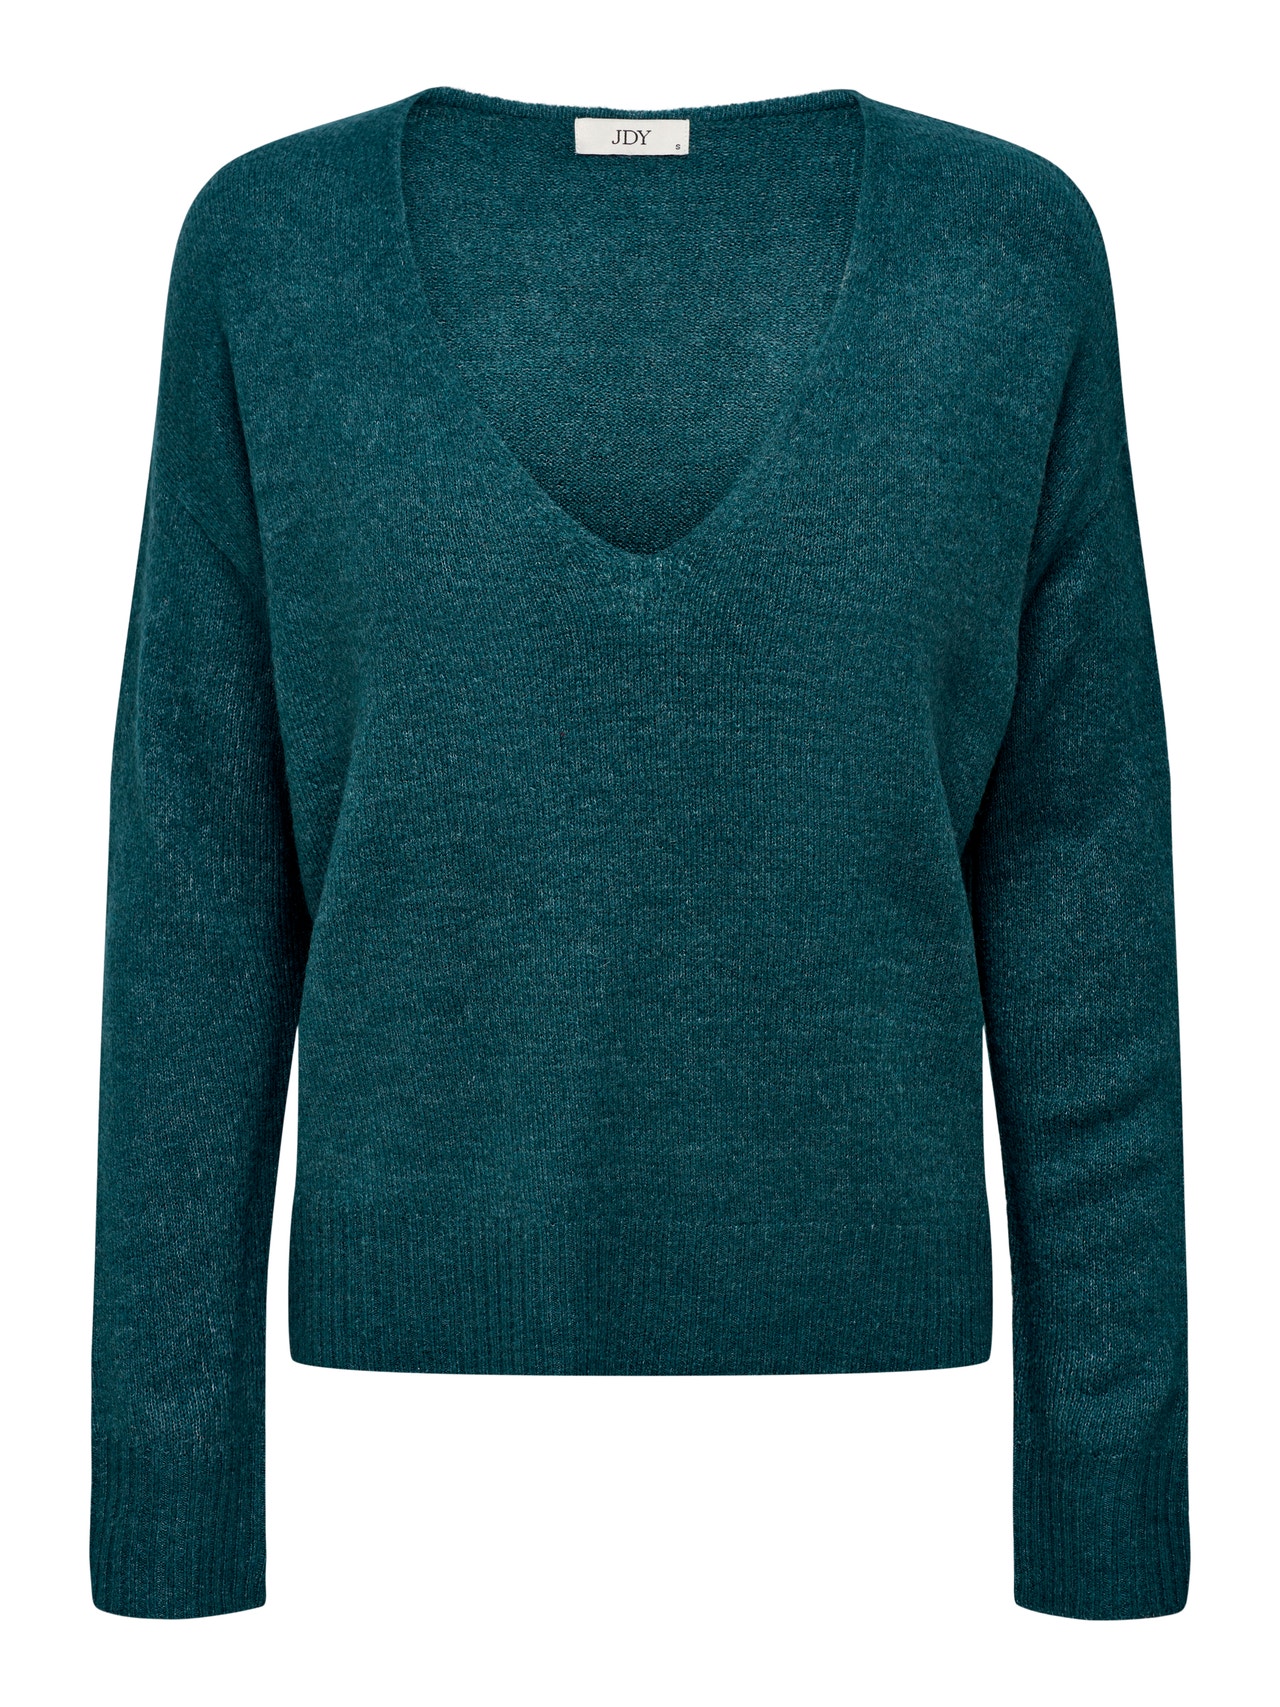 ONLY V-neck Knitted Pullover -Atlantic Deep - 15207823